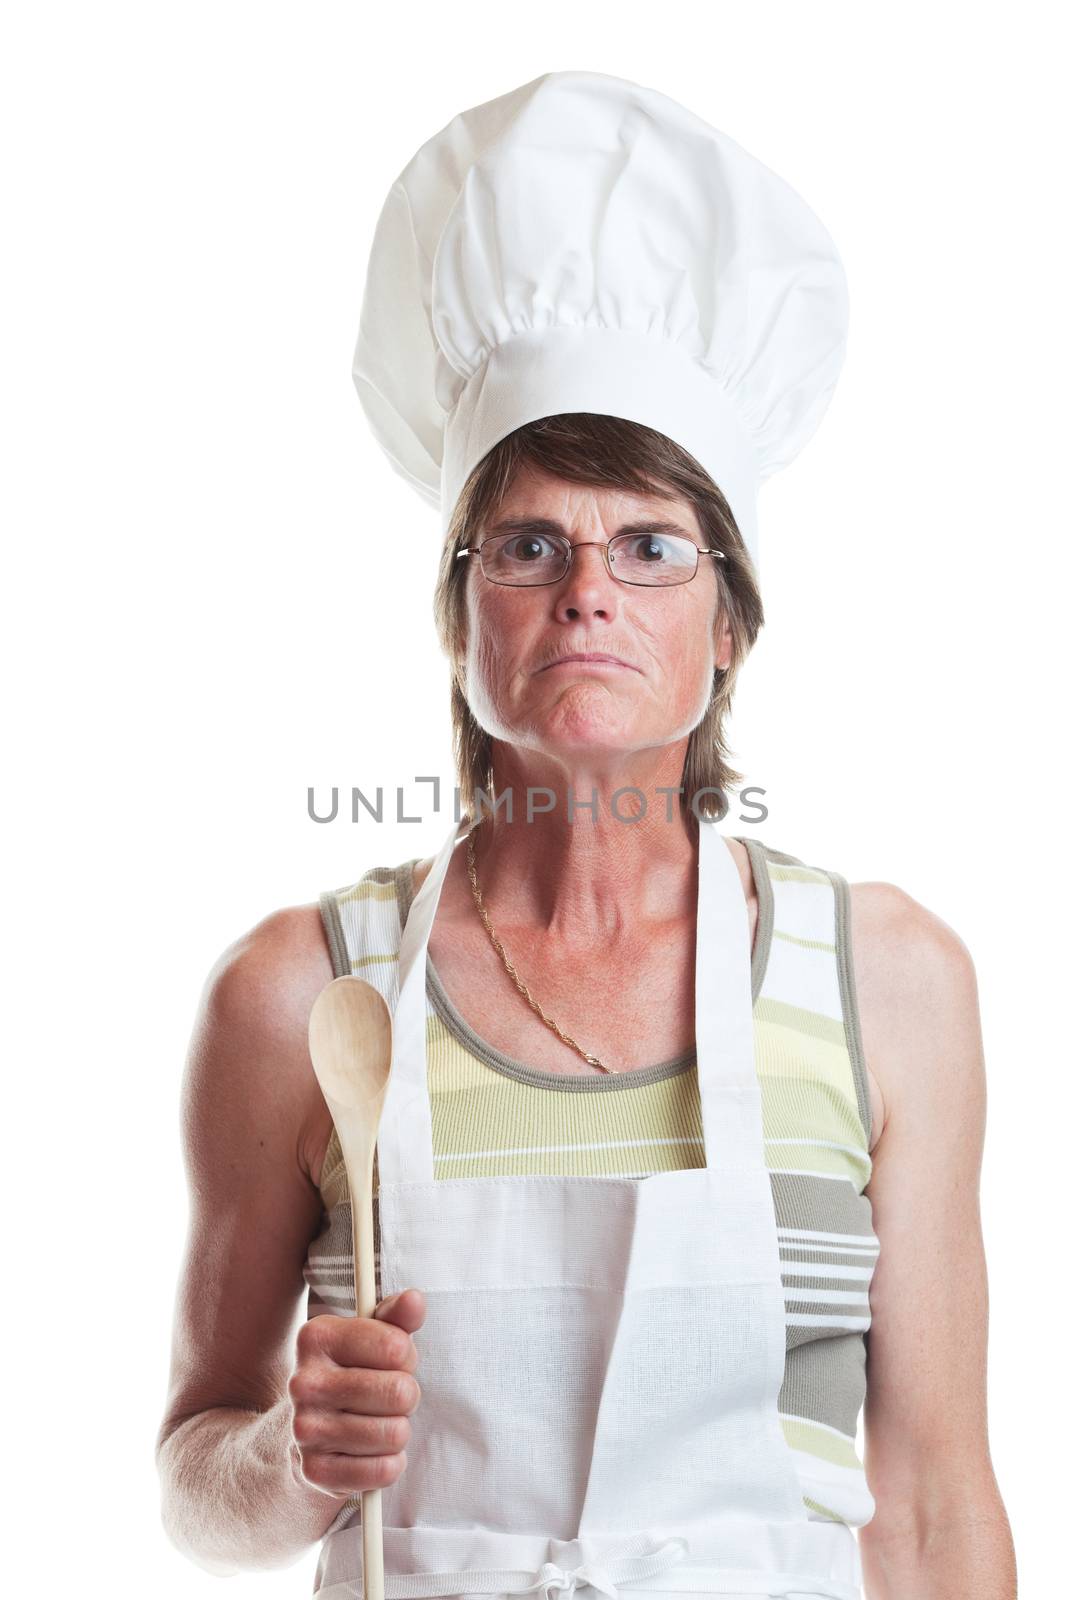 A portrait of a stern chef who rules the kitchen with an iron fist.  Shot on white background.